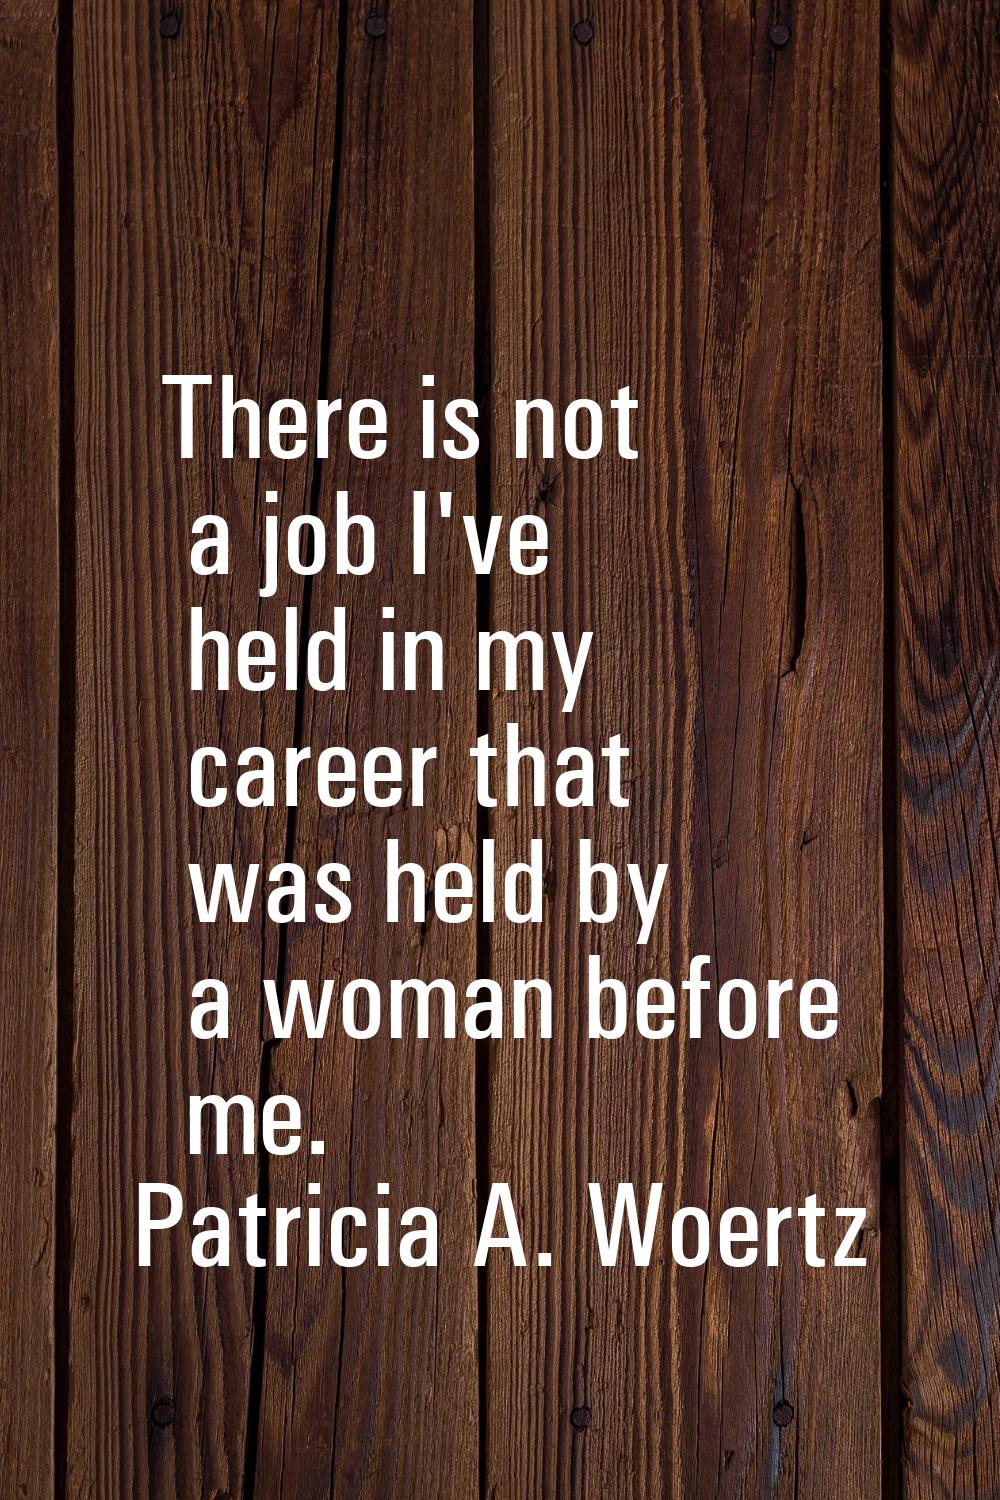 There is not a job I've held in my career that was held by a woman before me.